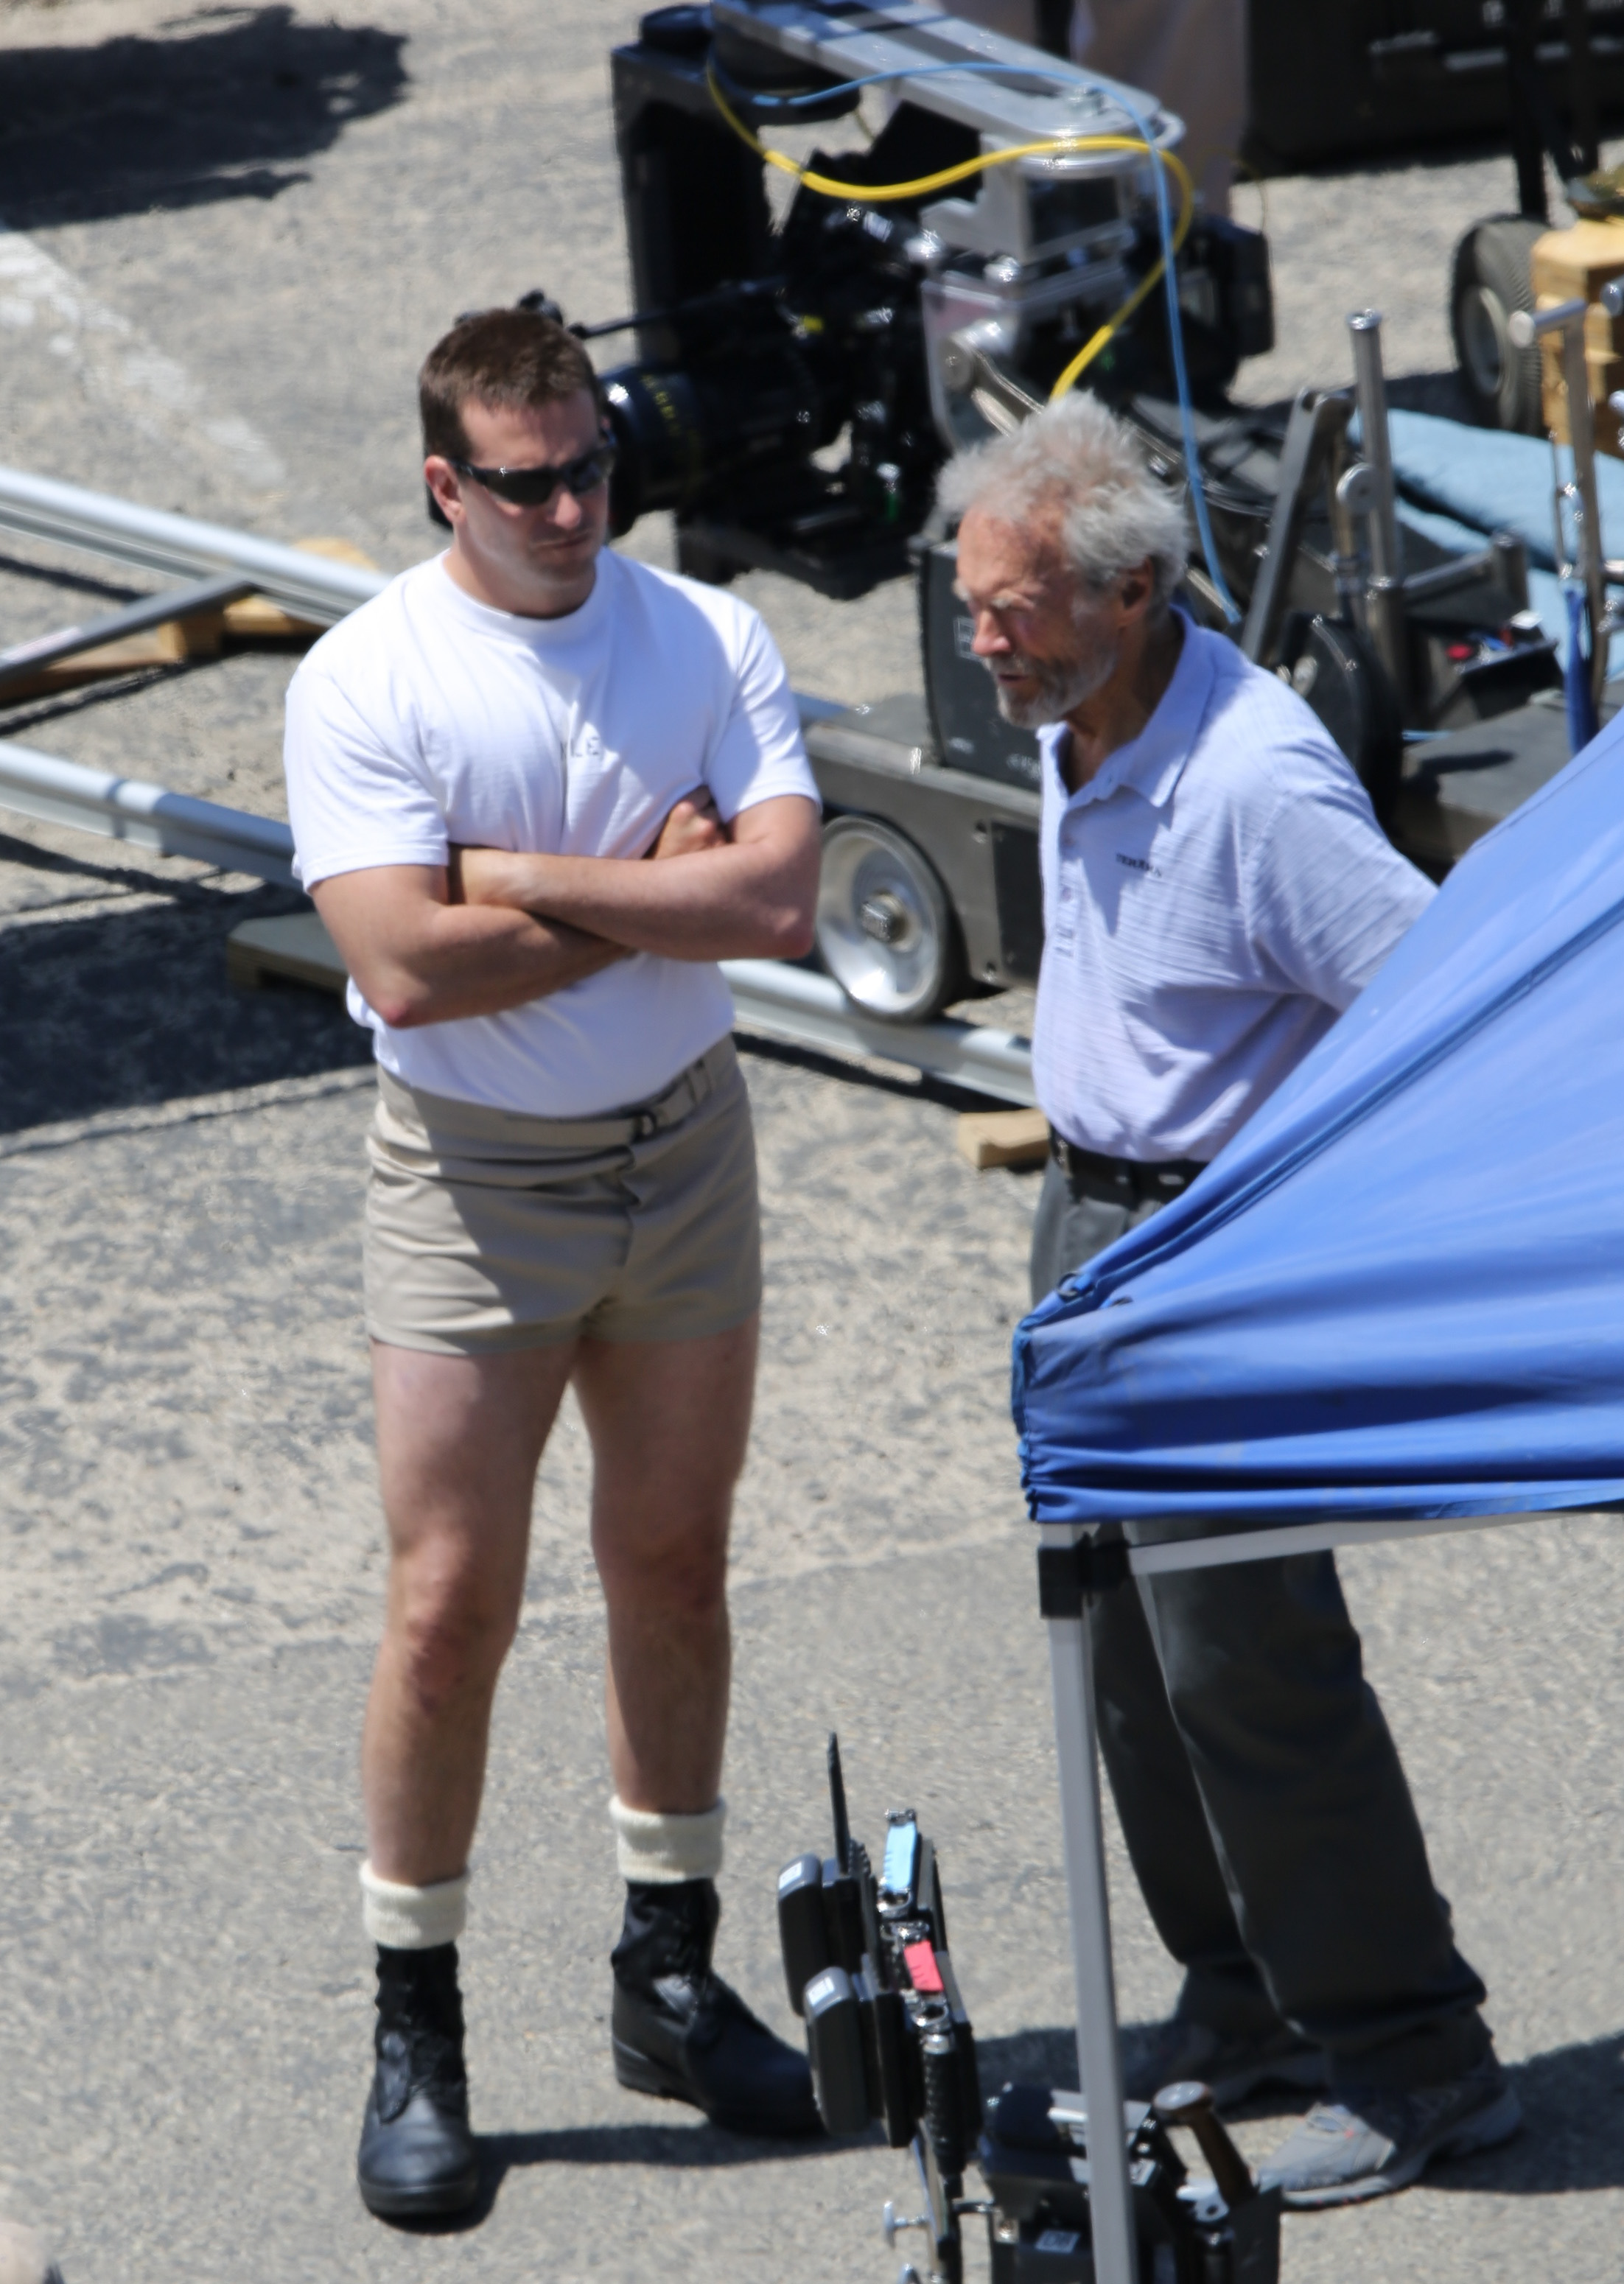 Bradley Cooper and Clint Eastwood on the set of 'American Sniper' in Malibu, California on June 4, 2014 in Los Angeles.